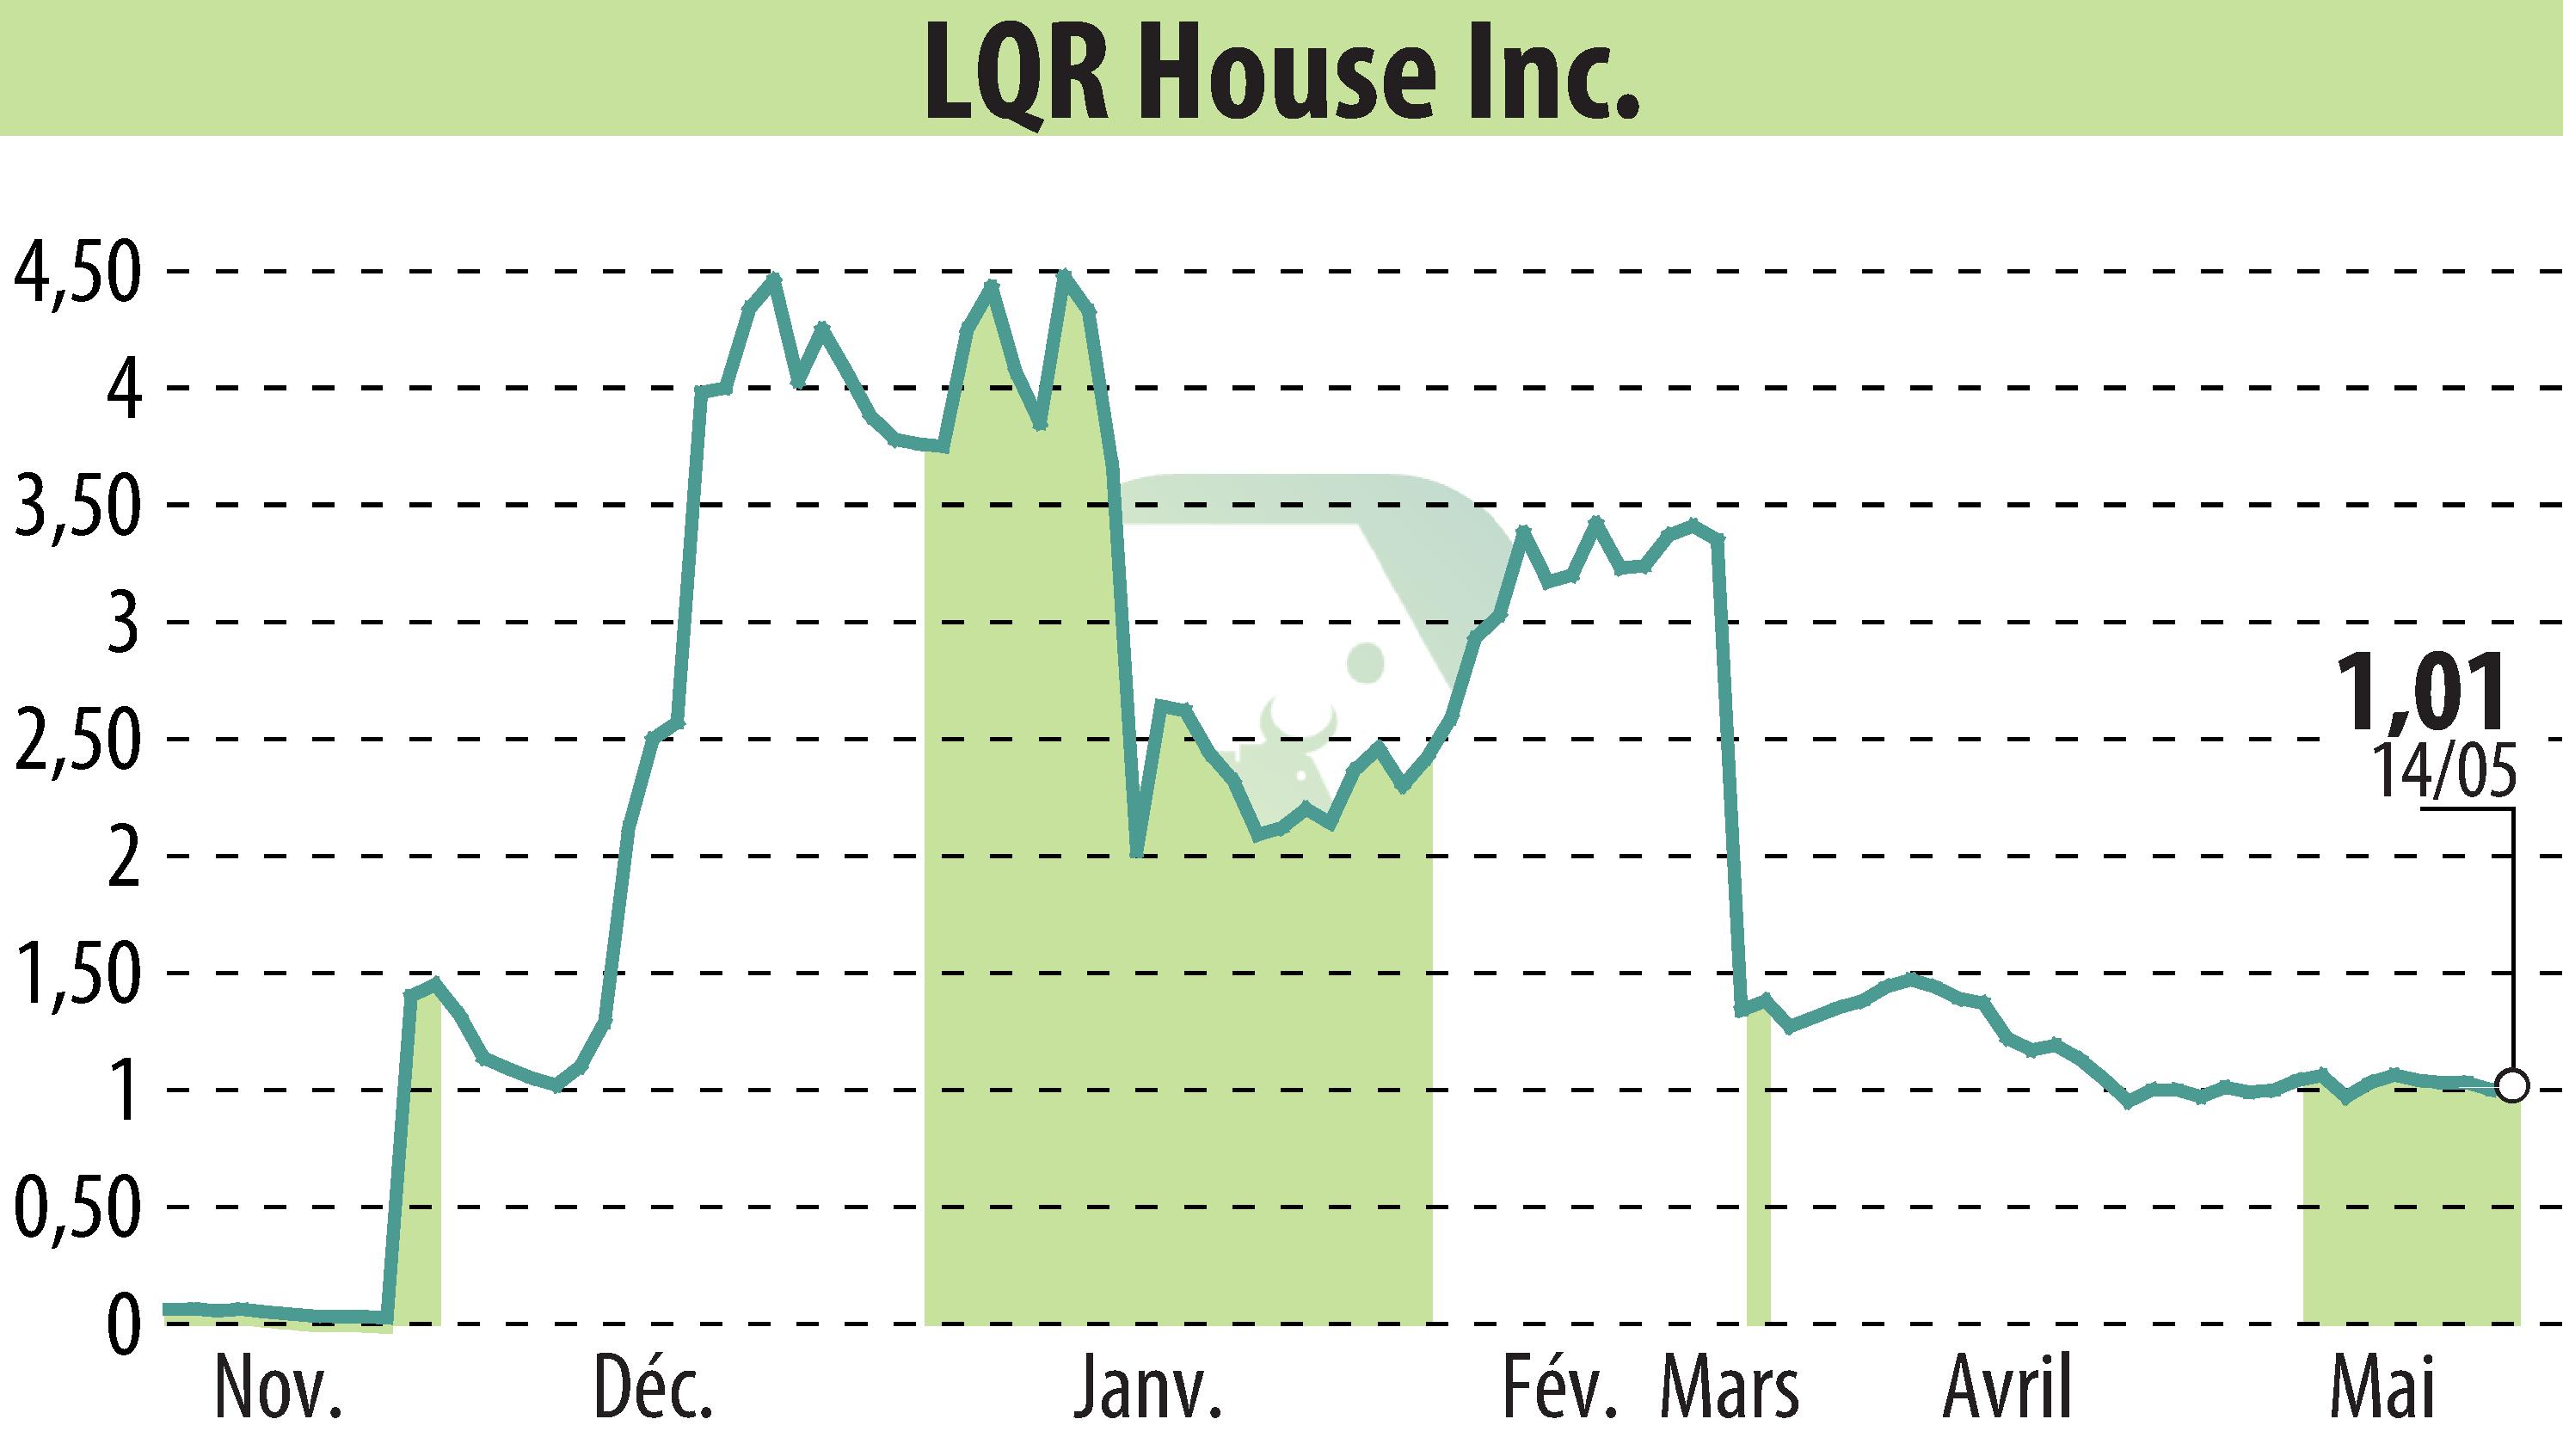 Stock price chart of LQR House Inc. (EBR:LQR) showing fluctuations.